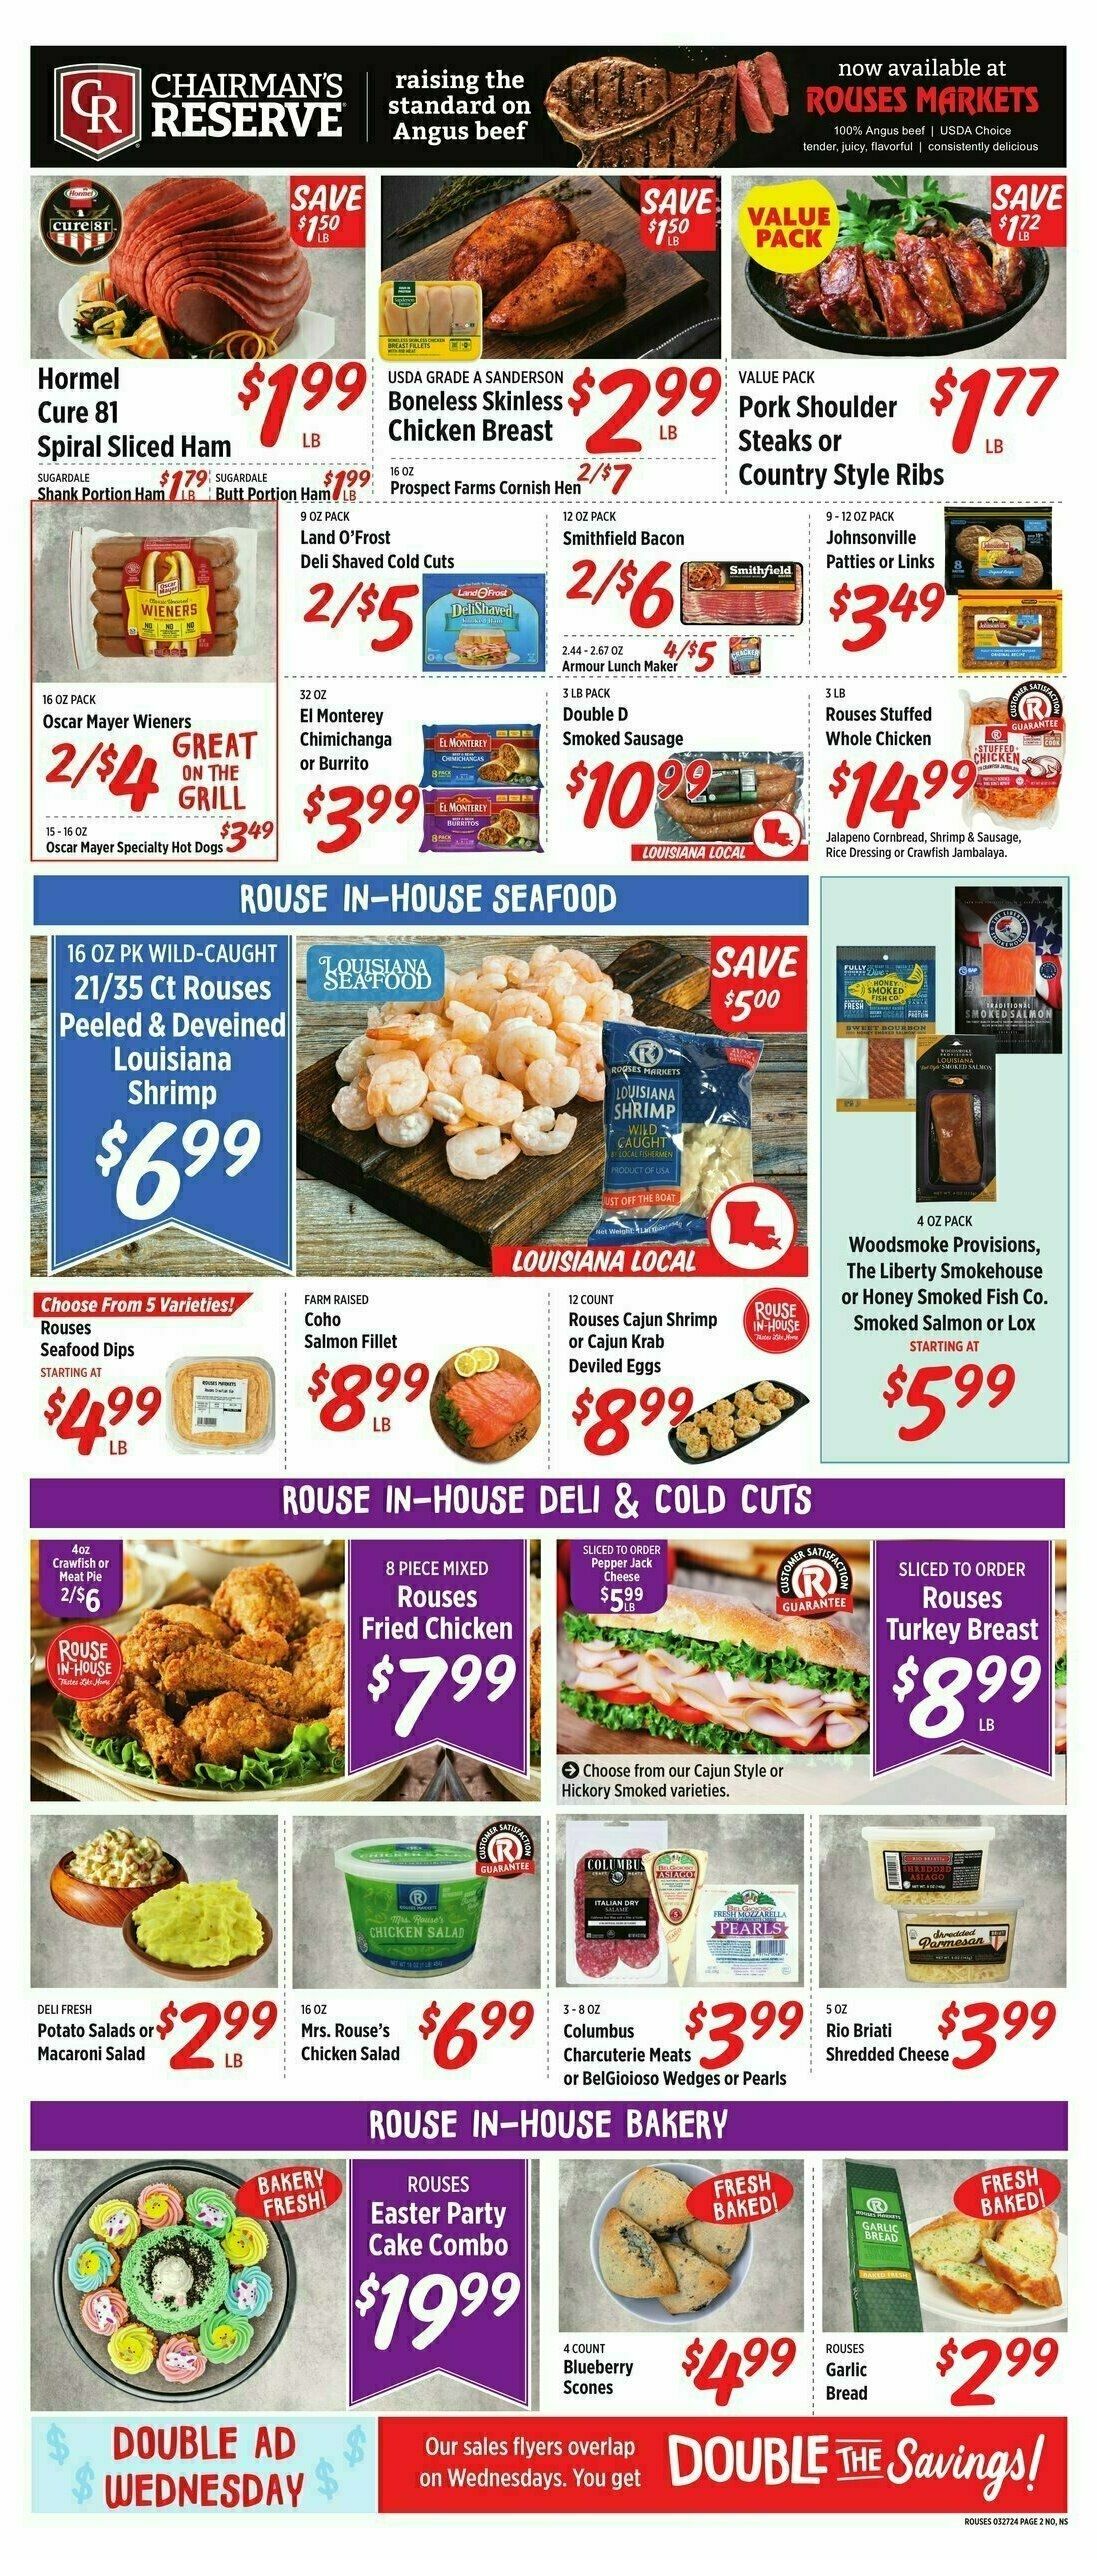 Rouses Markets Weekly Ad from March 27